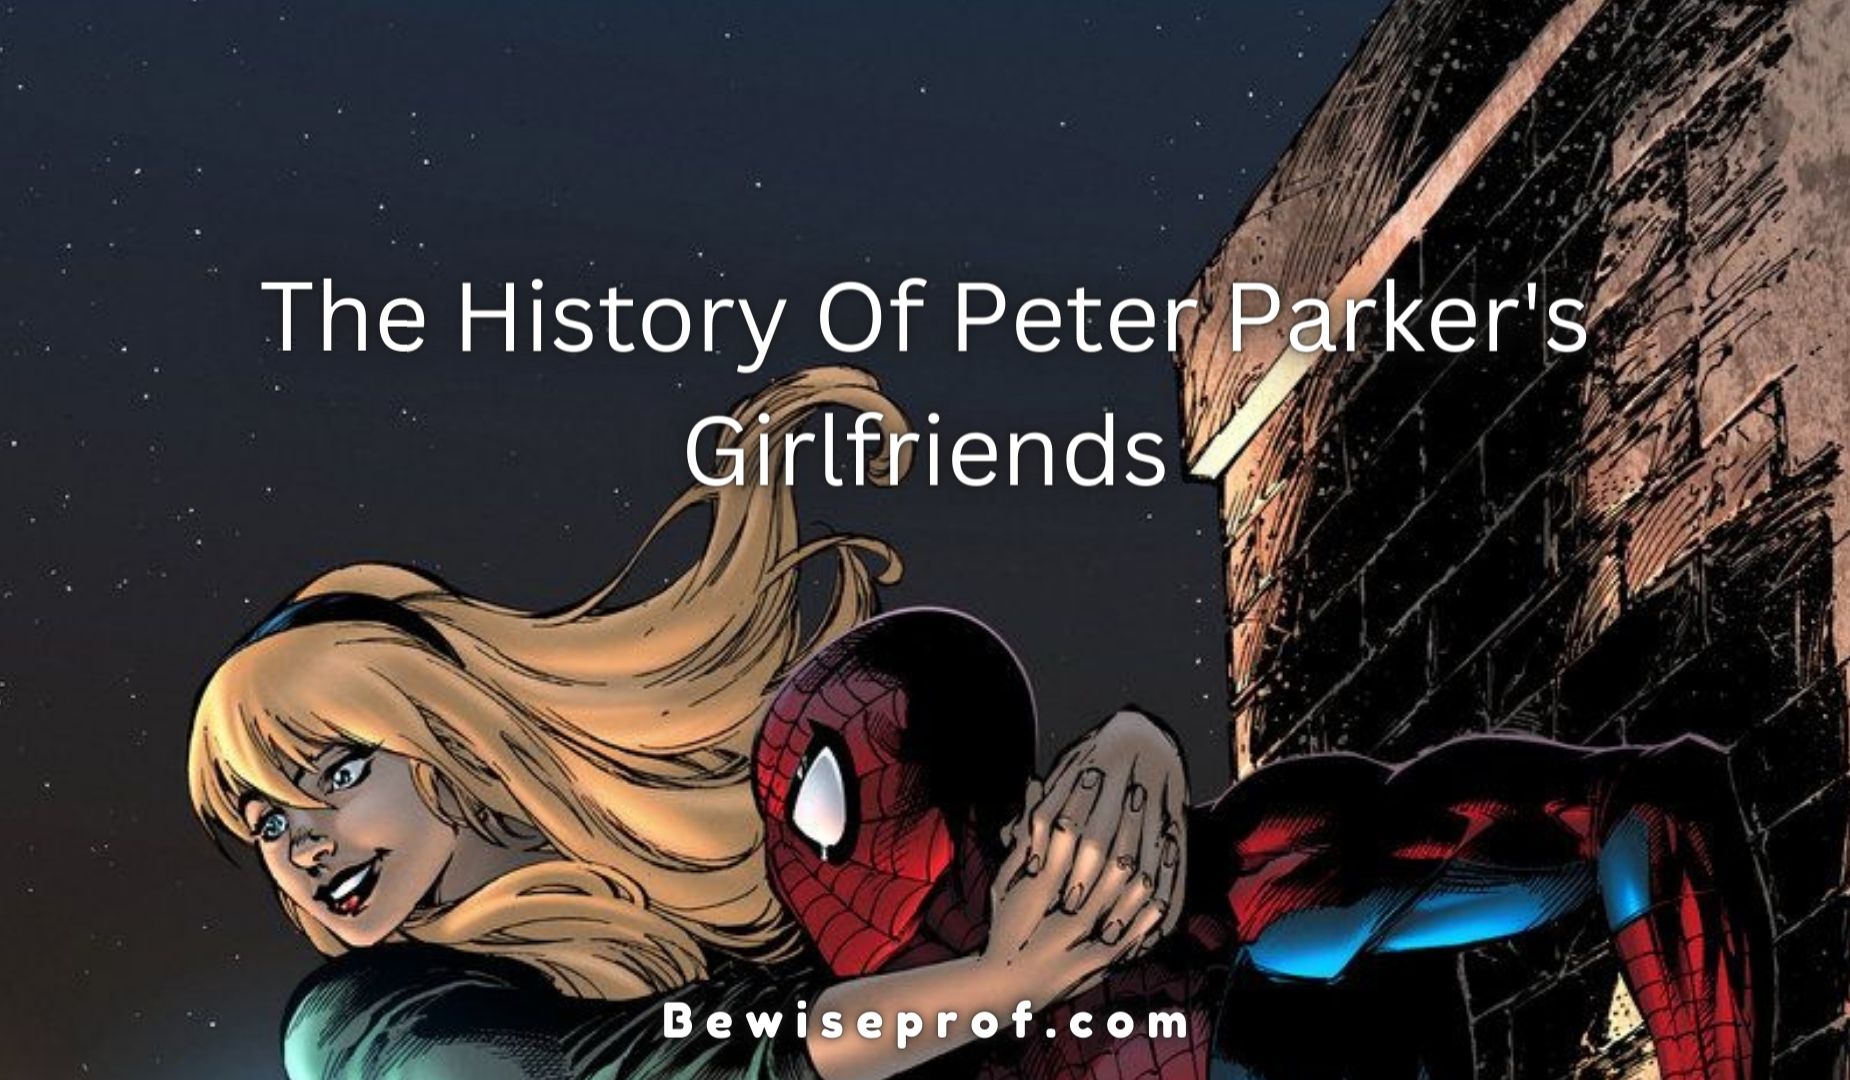 The History Of Peter Parker's Girlfriends